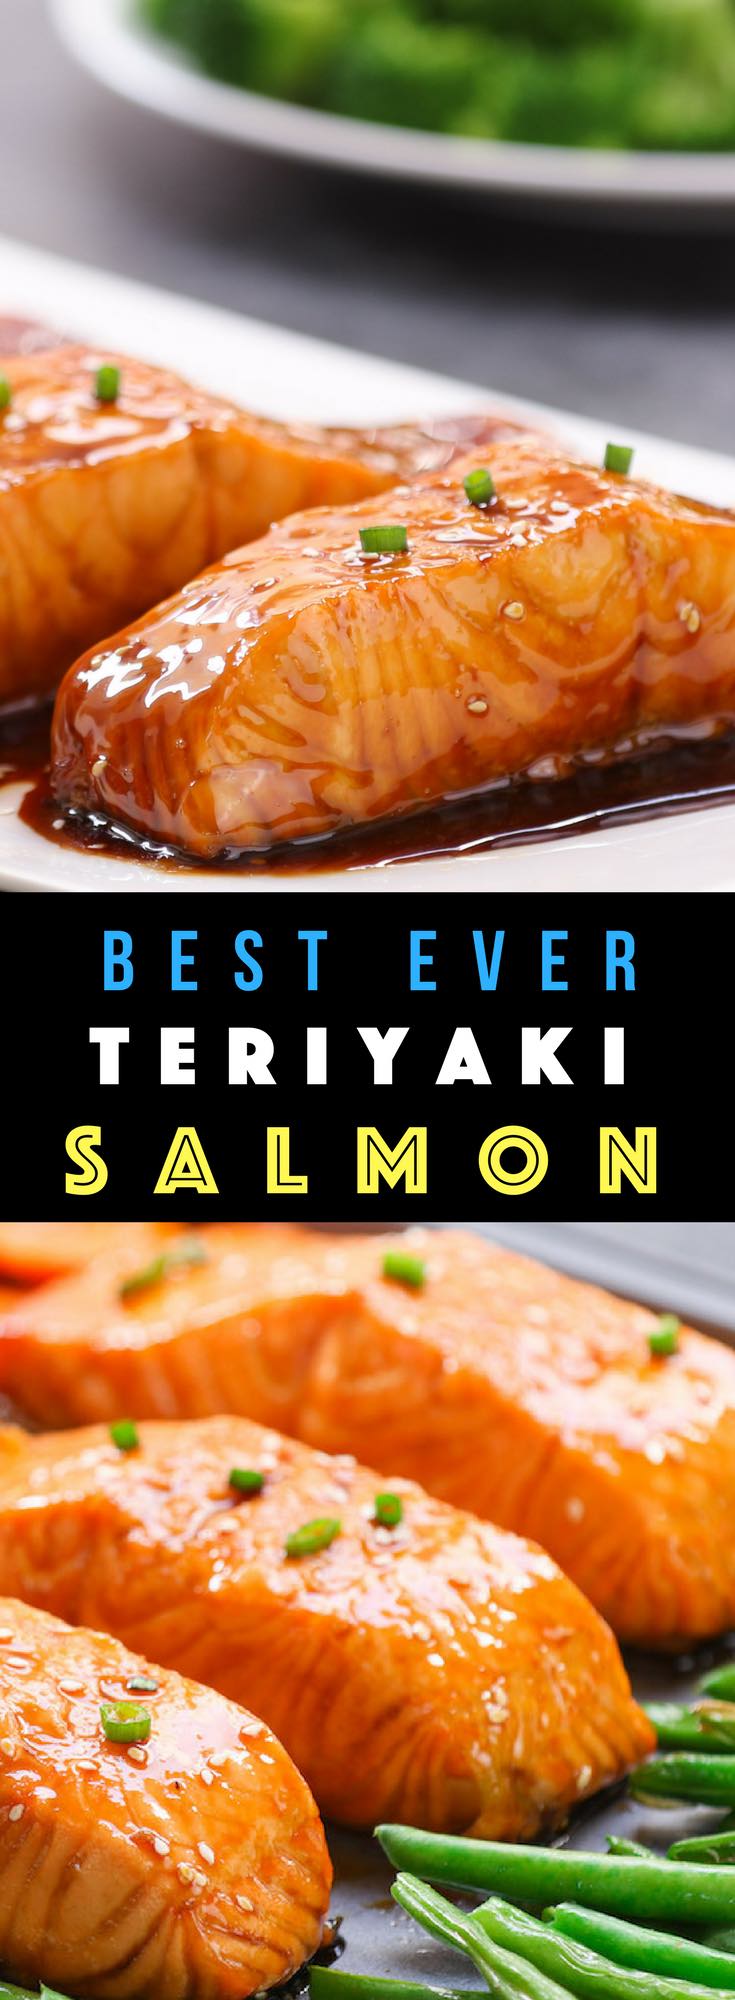 This Baked Teriyaki Salmon is an irresistible dinner that’s healthy and flavorful… moist and flakey salmon coated with a homemade sticky and sweet teriyaki sauce. So good! #bakedSalmon #teriyakiSalmon